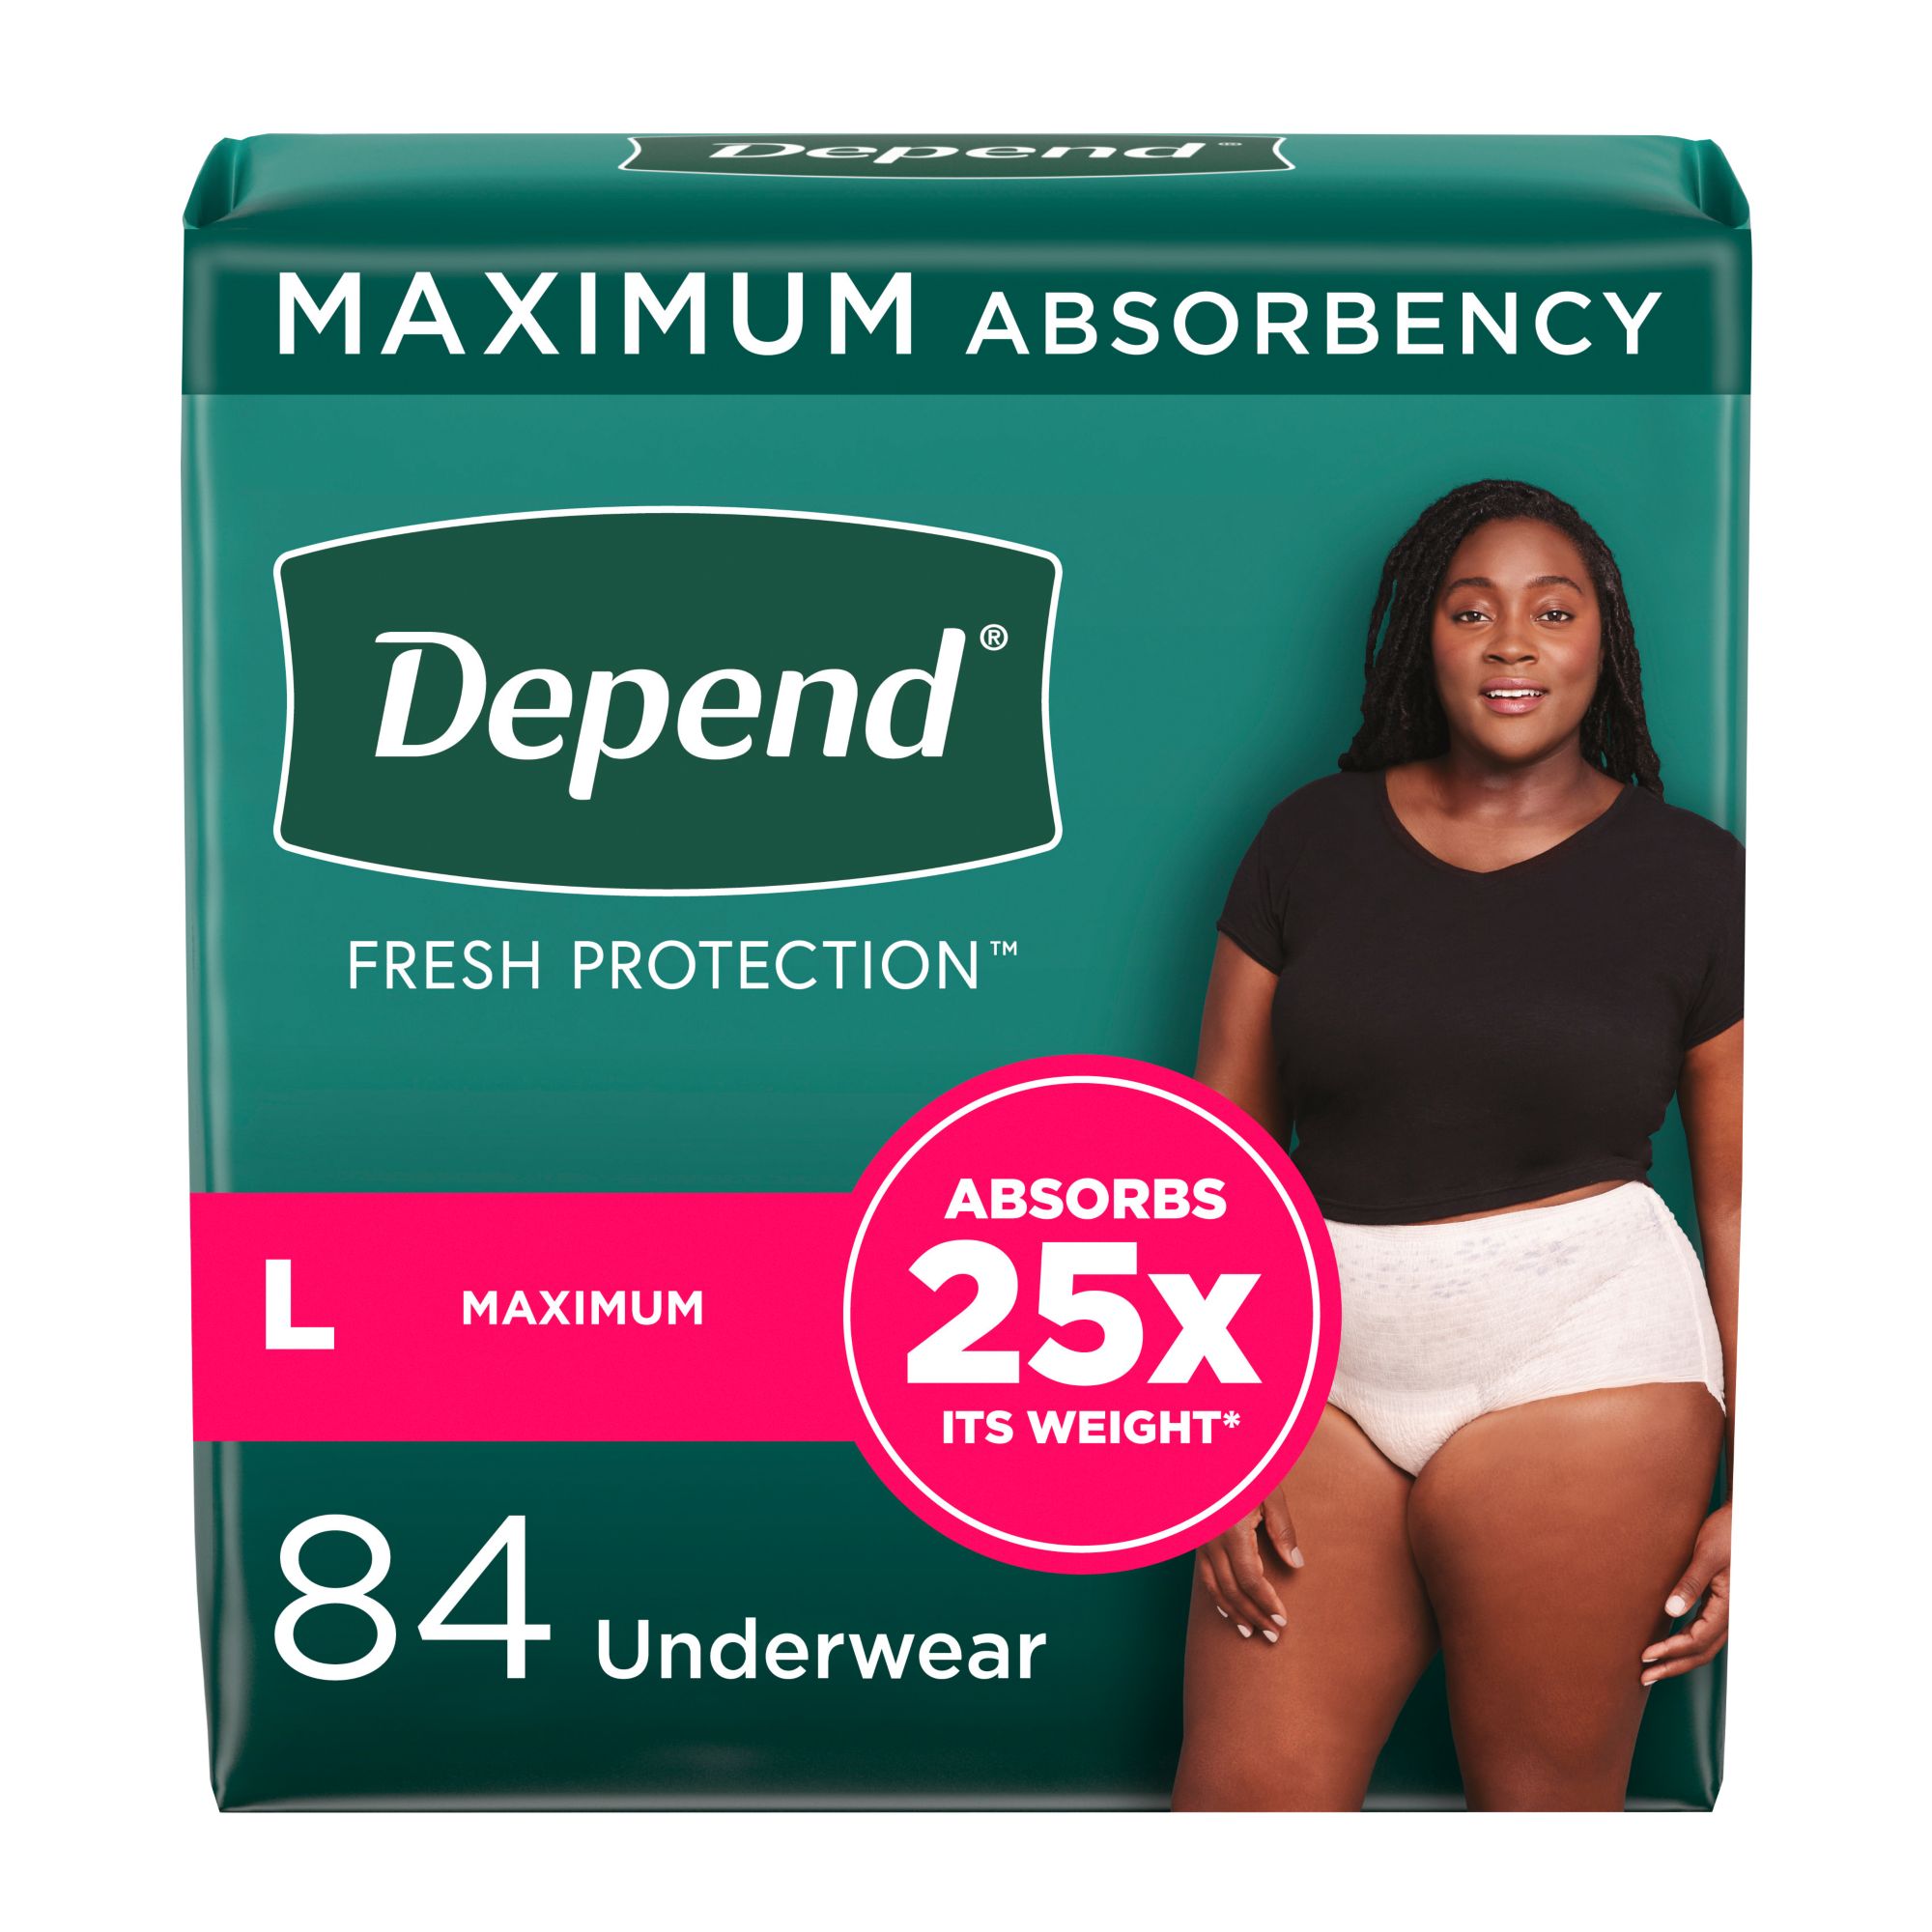 Depend Fresh Protection Adult Incontinence Underwear for Women, Large - Blush, 84 ct.